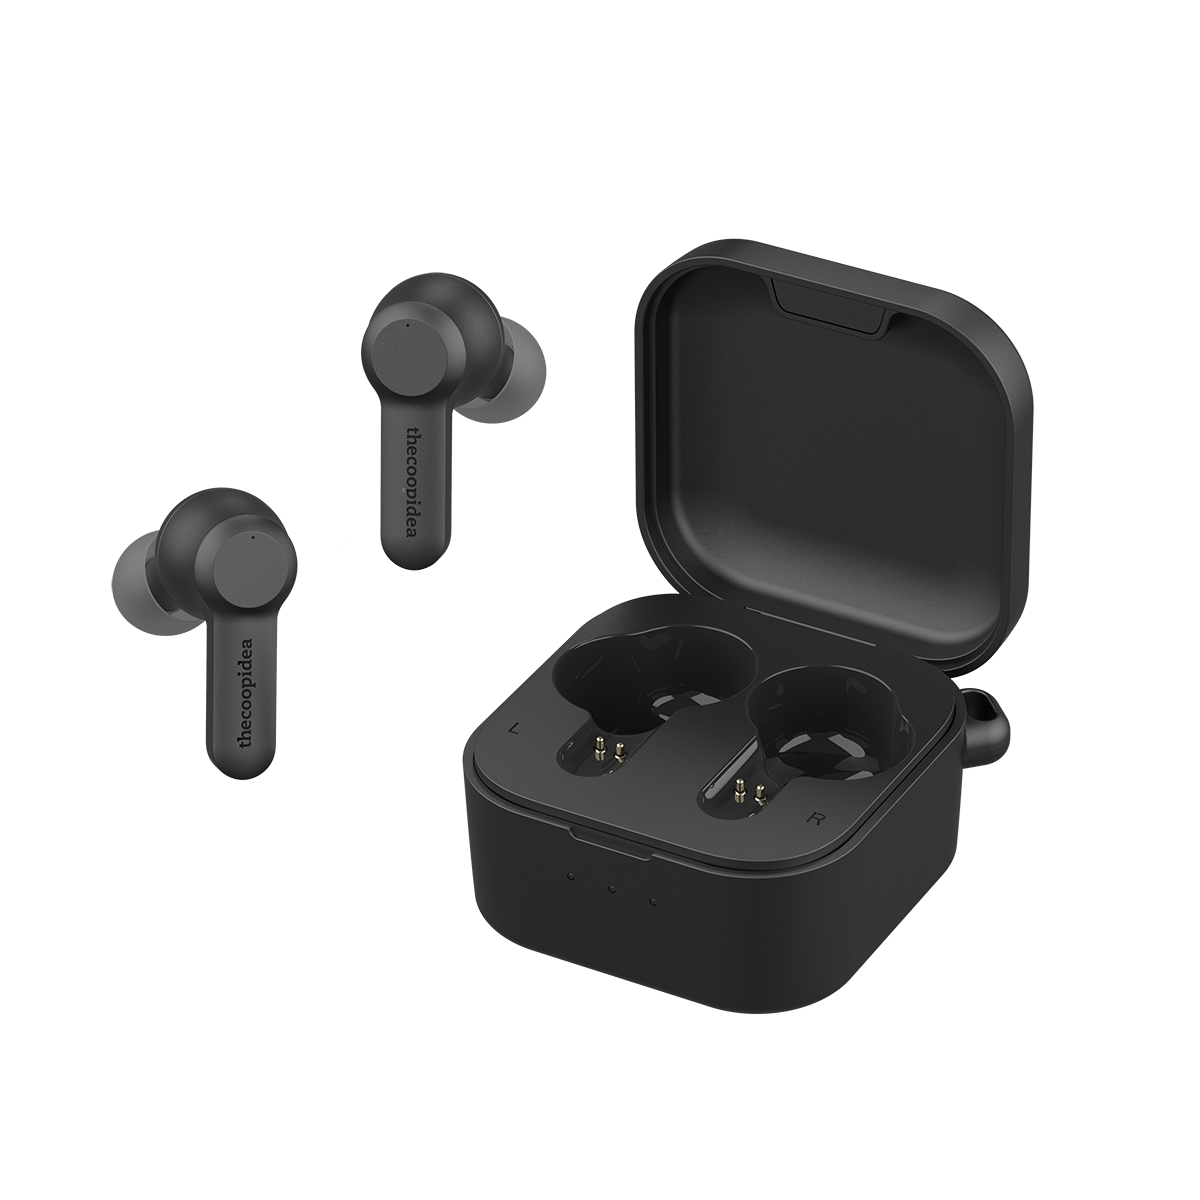 beans pro earbuds review